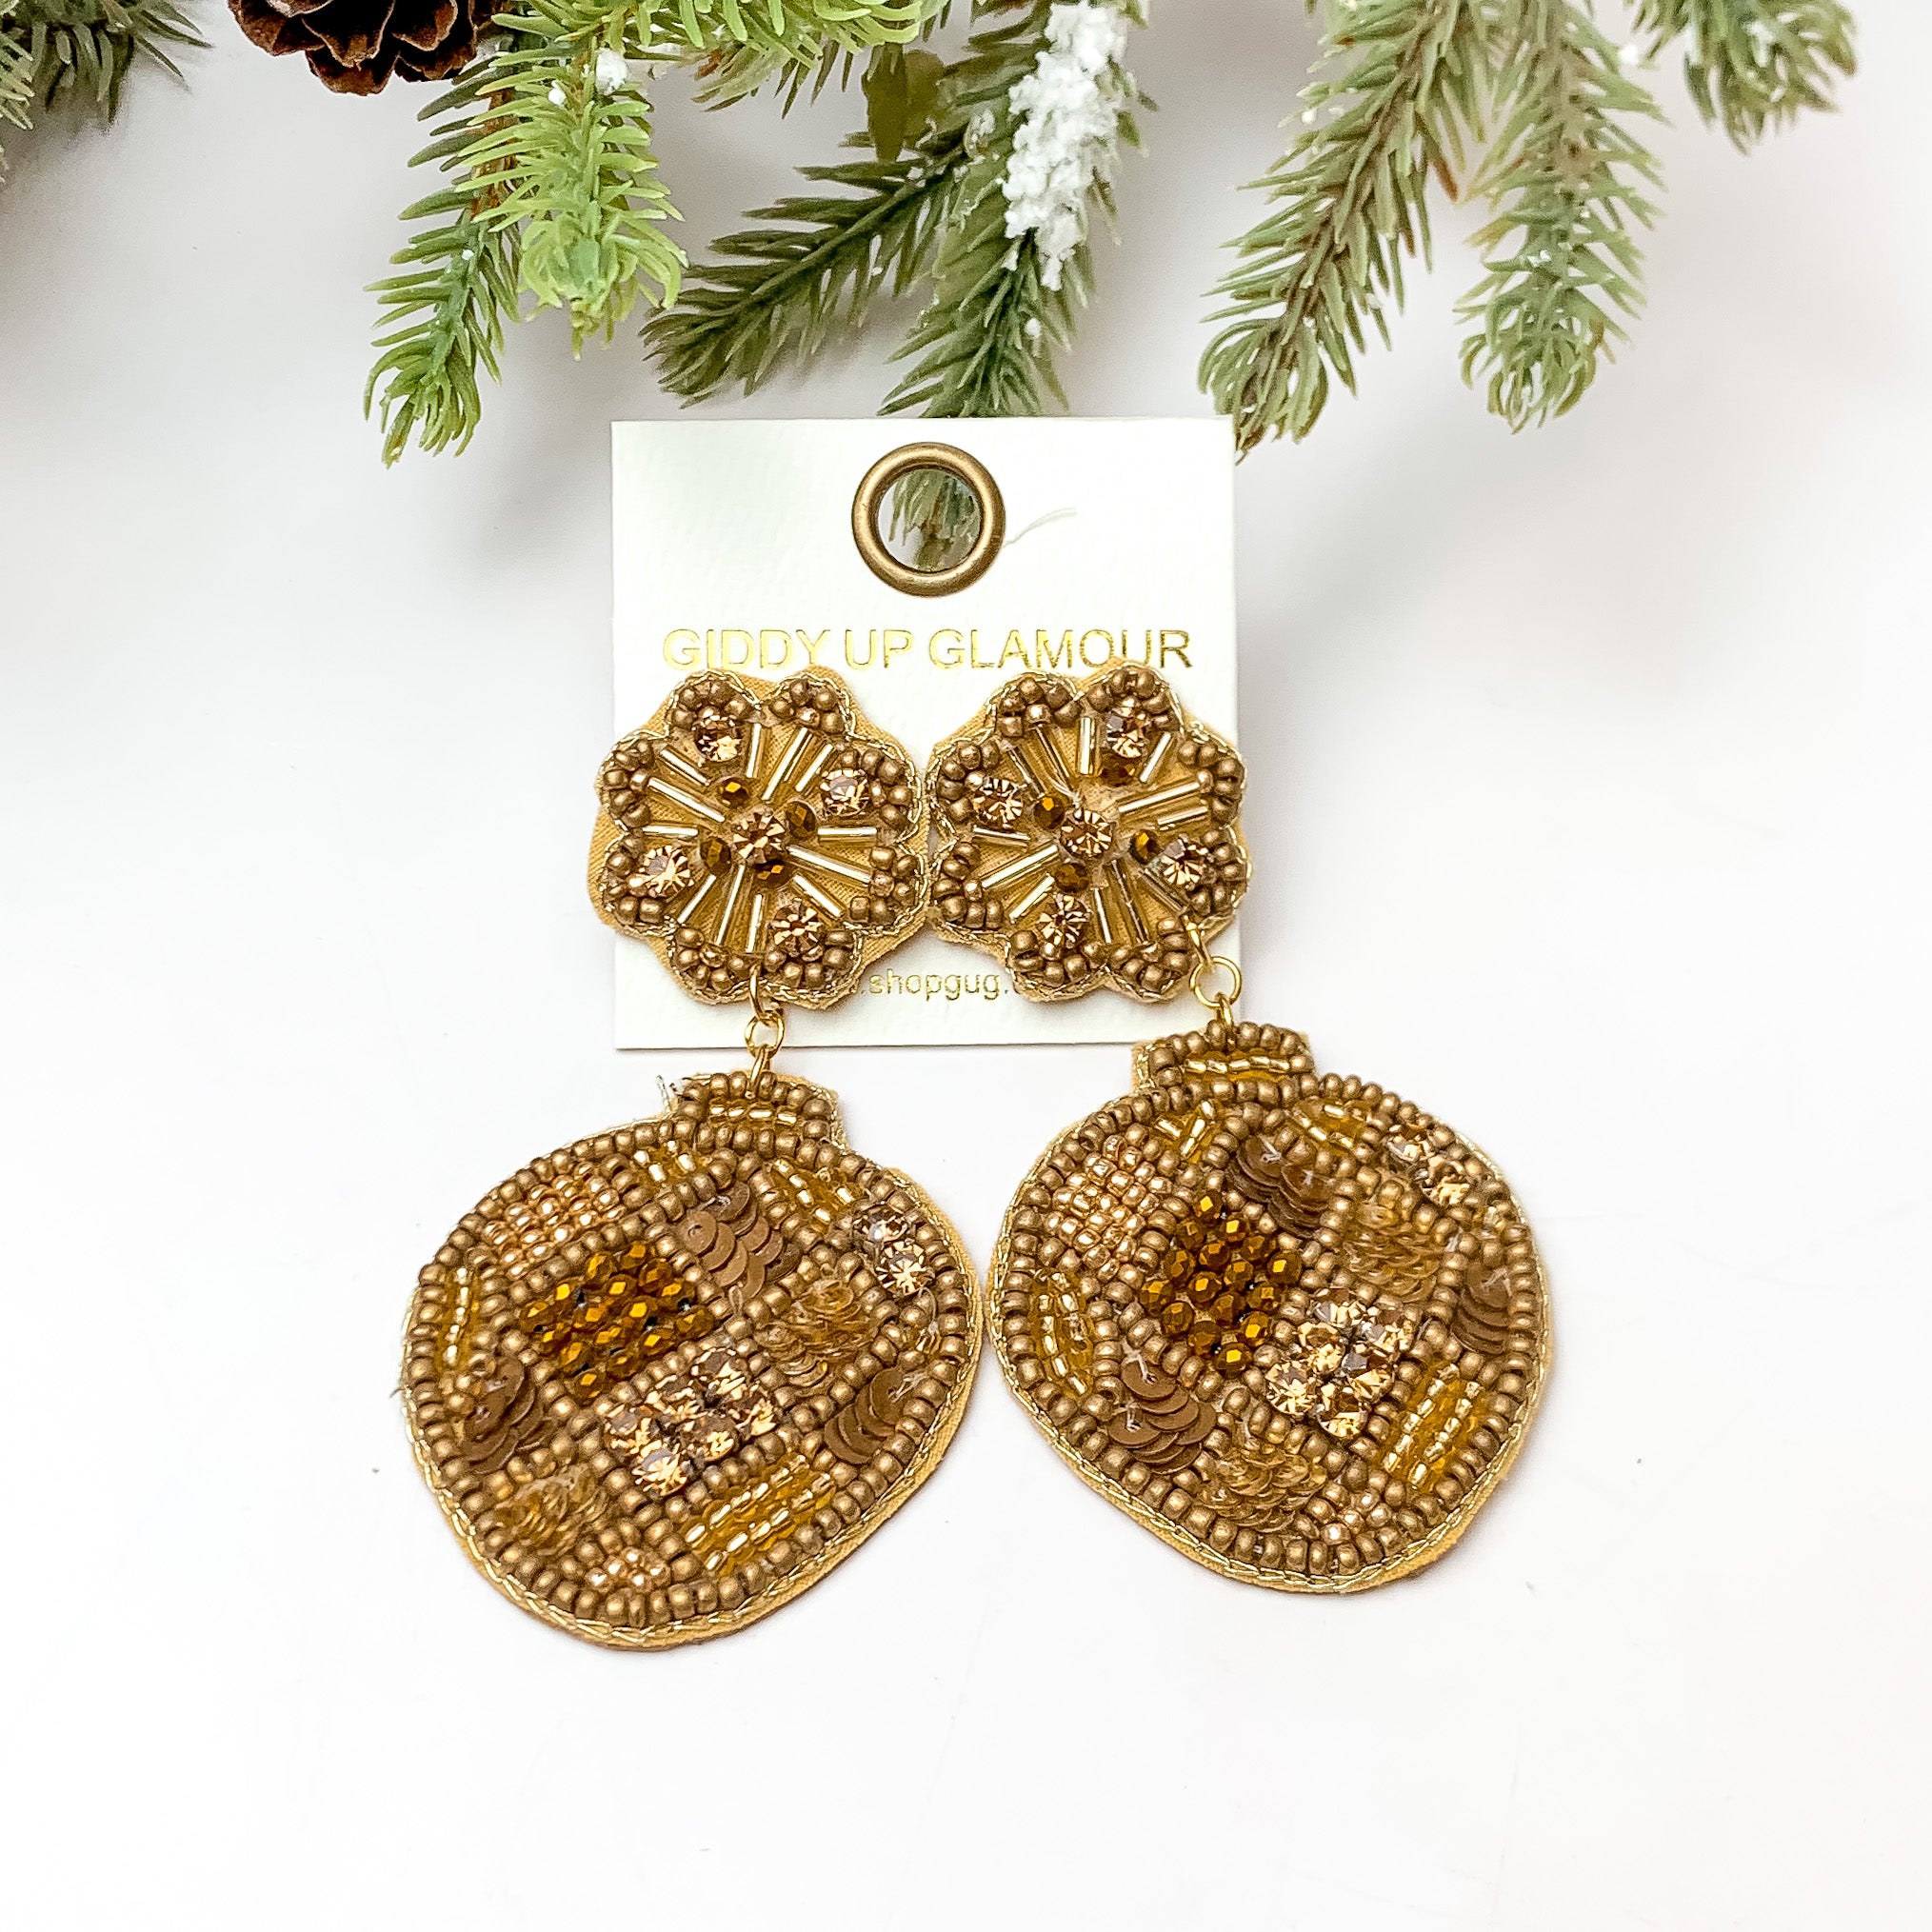 Beaded Post Back Ornament Earrings in Gold Tone - Giddy Up Glamour Boutique